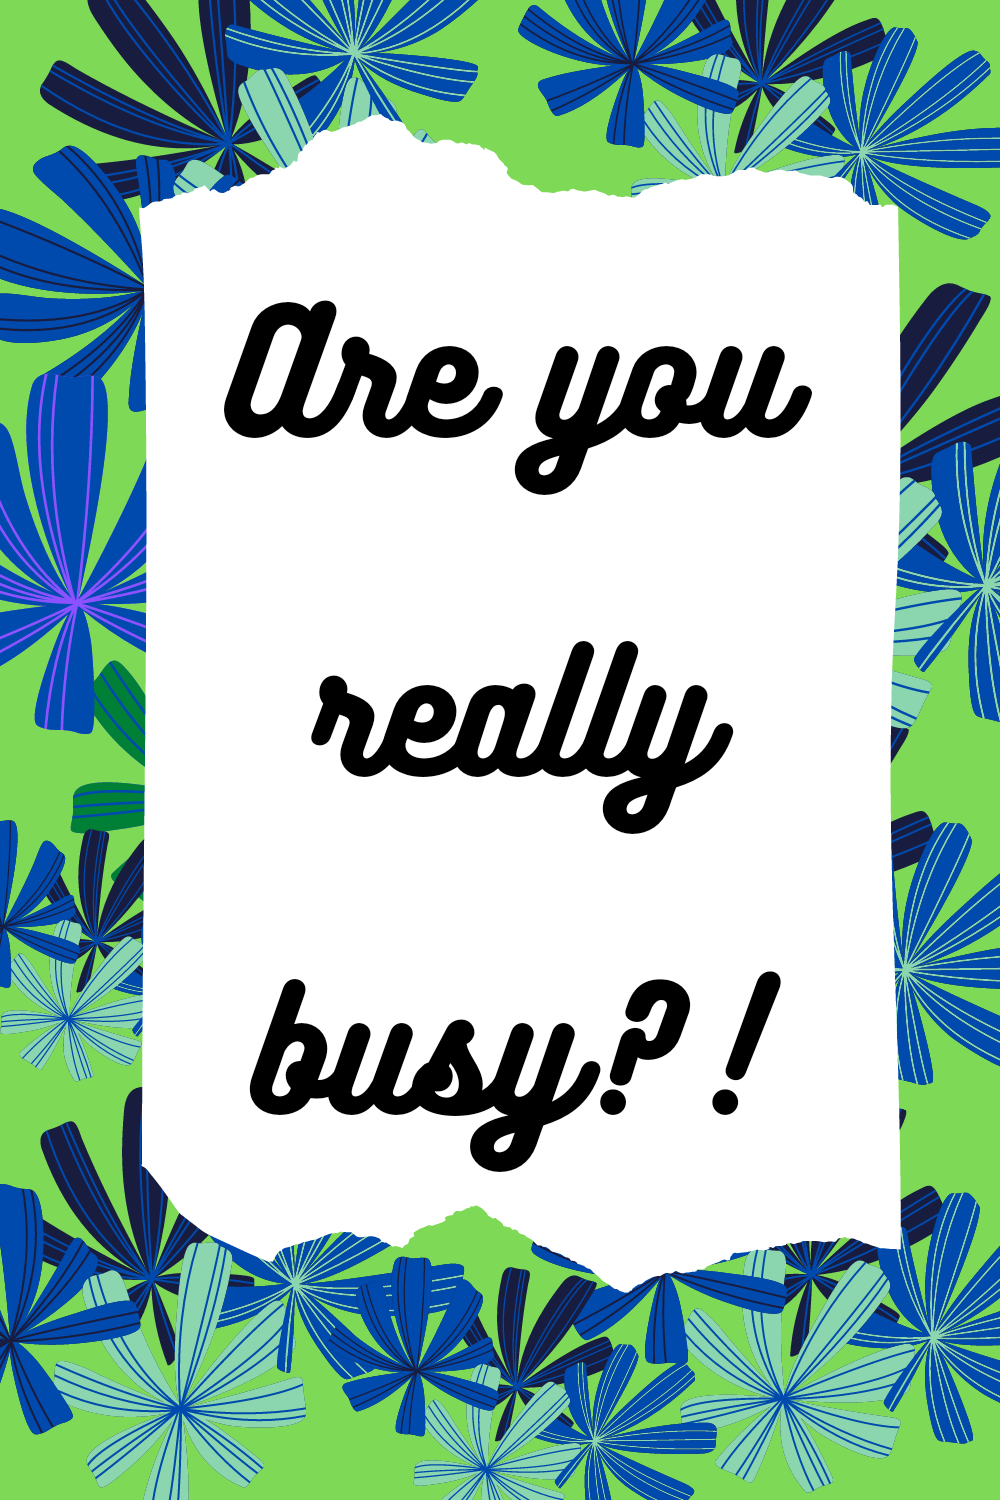 Are you really busy?